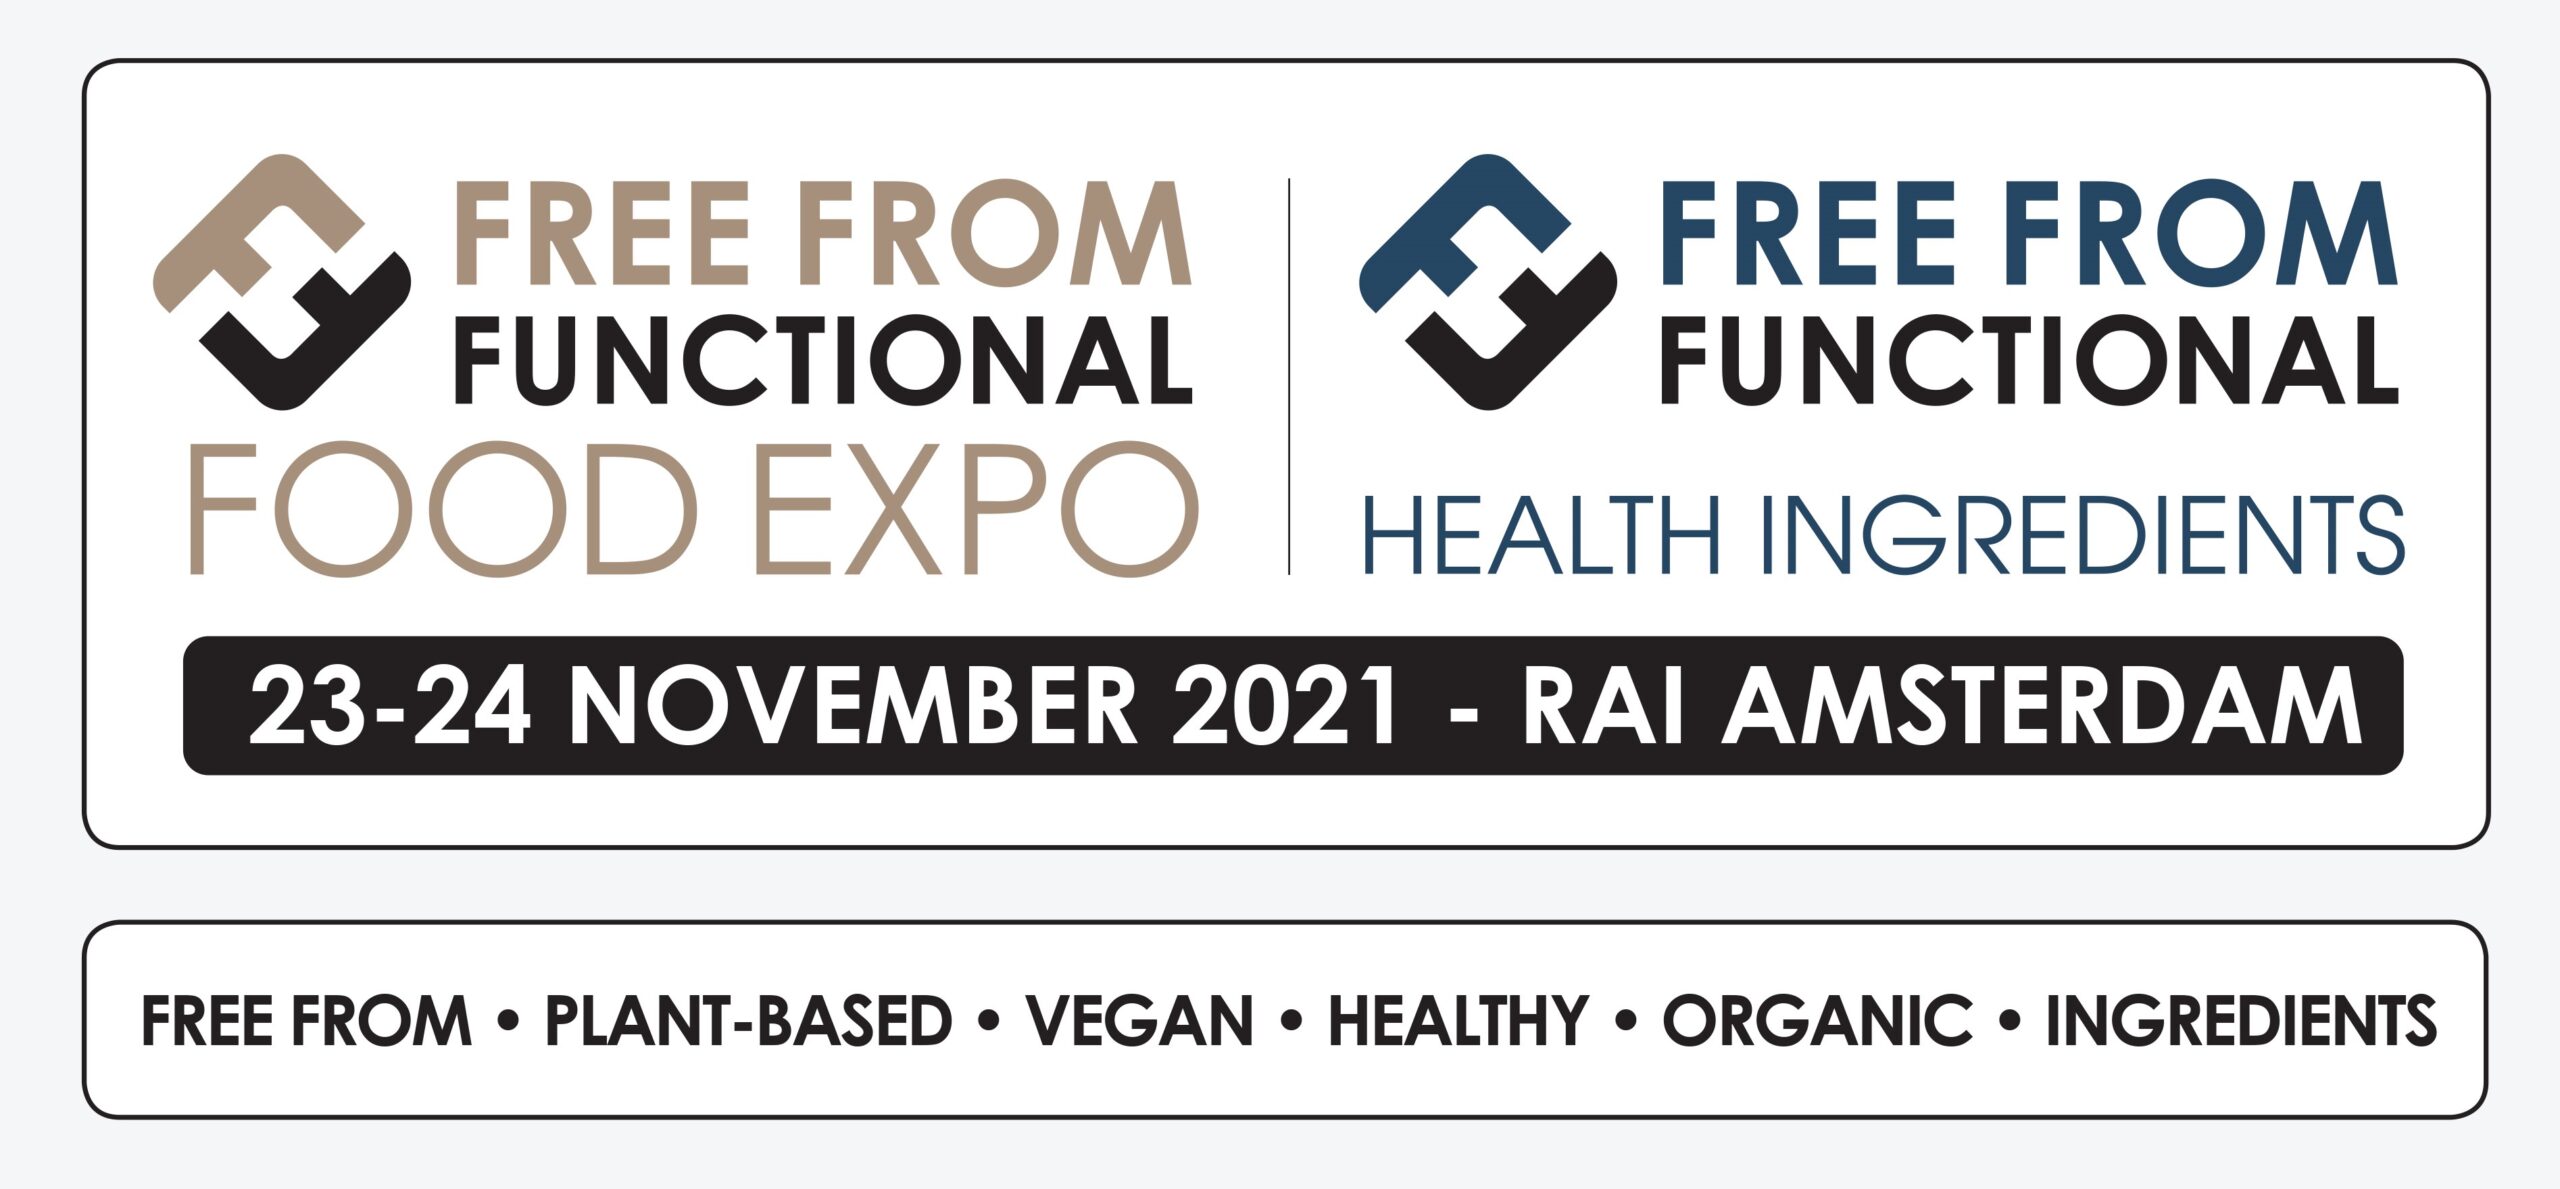 Free From Functional & Health Ingredients Expo